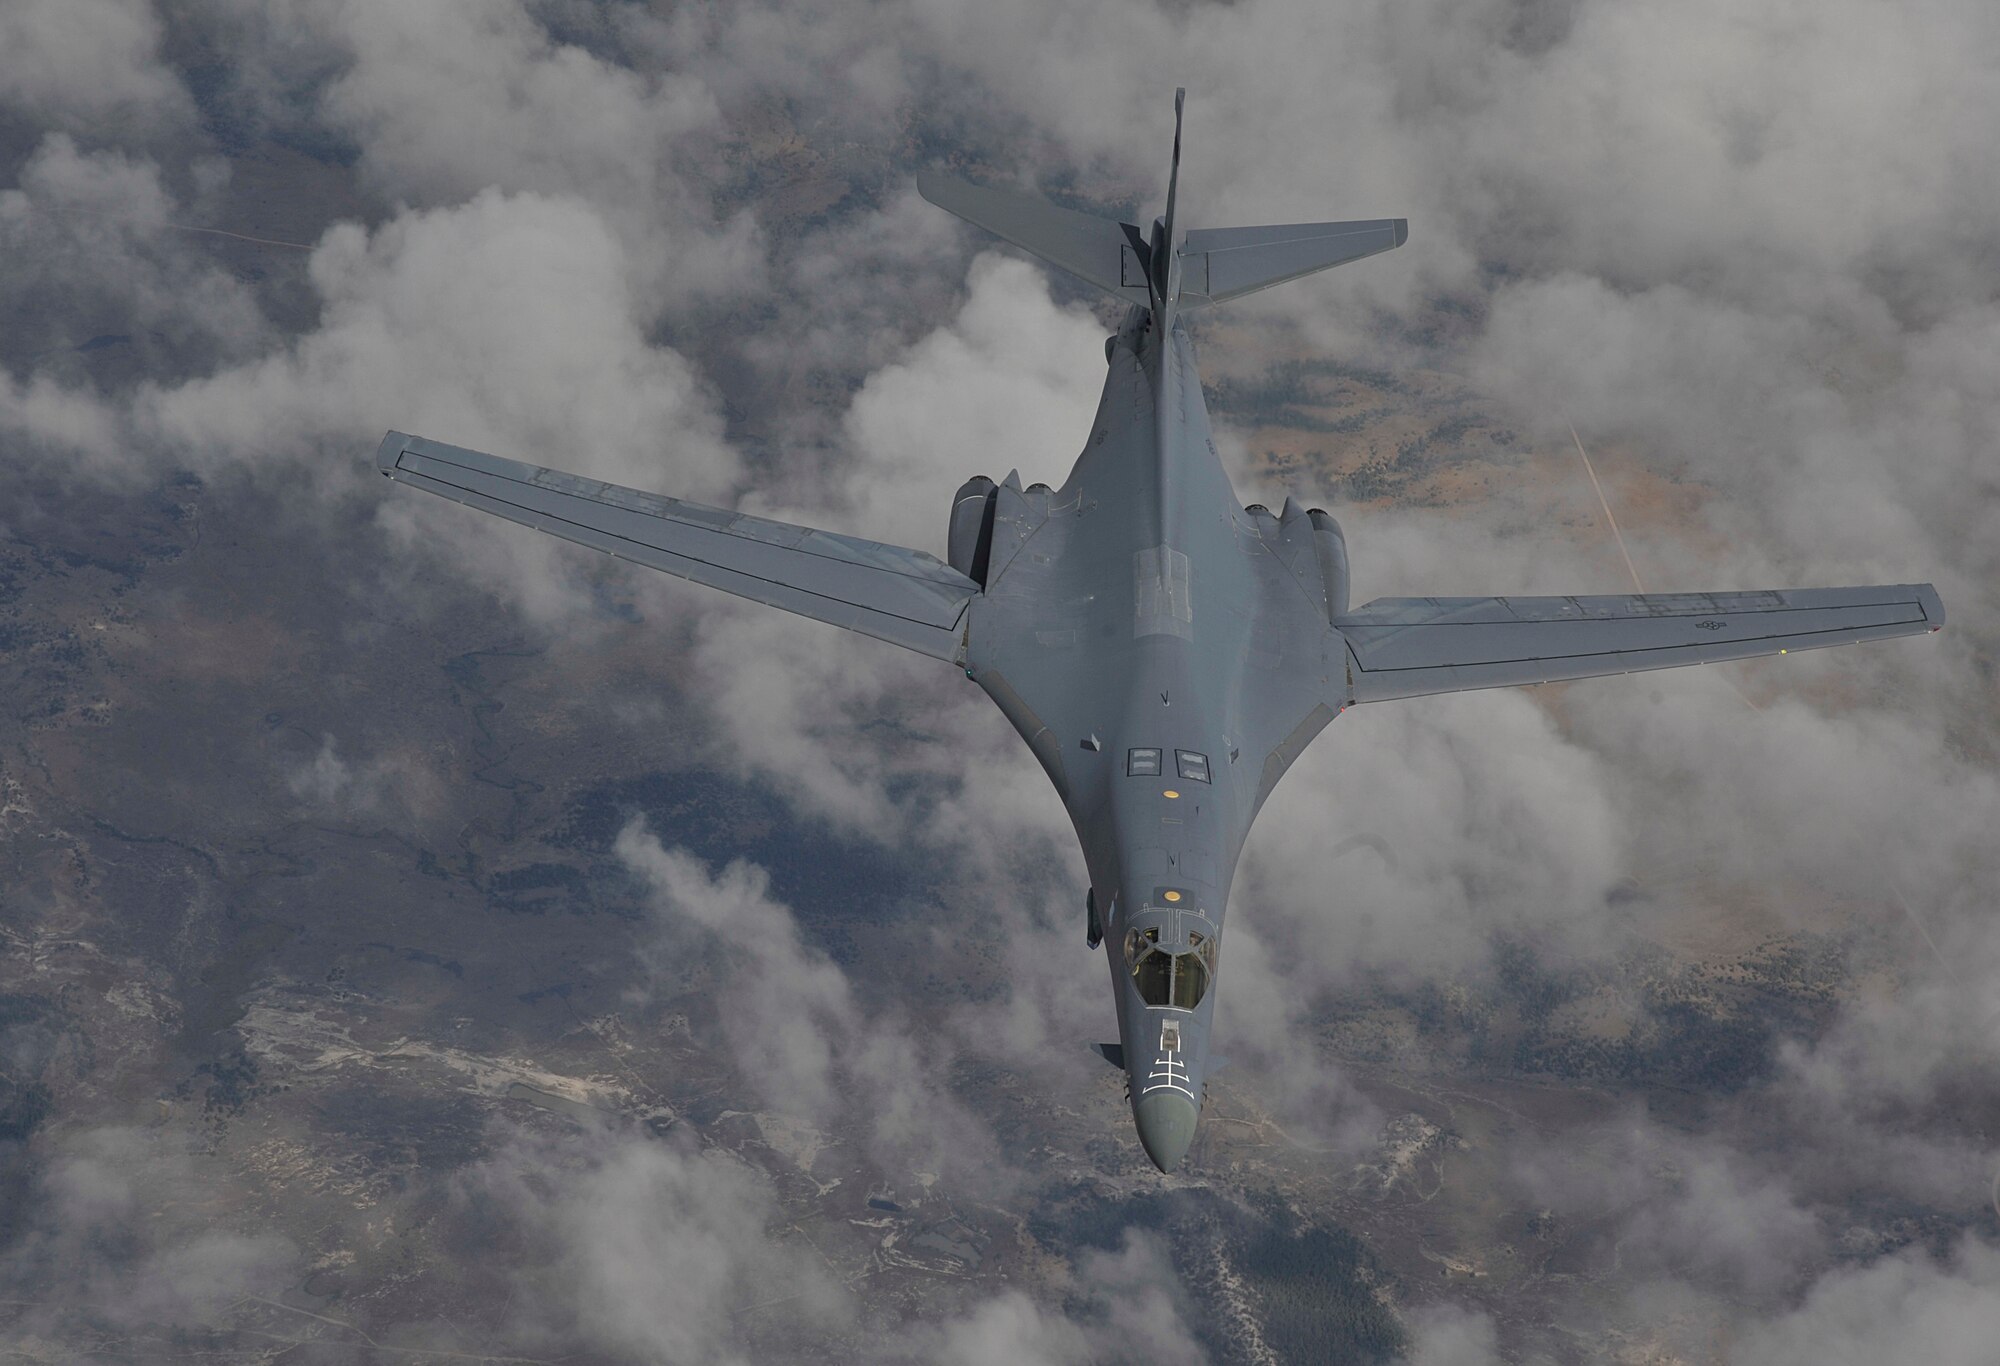 A B-1B Lancer assigned to Ellsworth Air Force Base, South Dakota, soars through the sky after participating in an aerial refueling training mission over South Dakota, Sept. 23, 2014. The B-1Bs blended wing/body configuration, variable-geometry wings and turbofan afterburning engines, combine to provide long range, maneuverability and high speed while enhancing survivability. (U.S. Air Force photo by Senior Airman Mary O'Dell/Released)